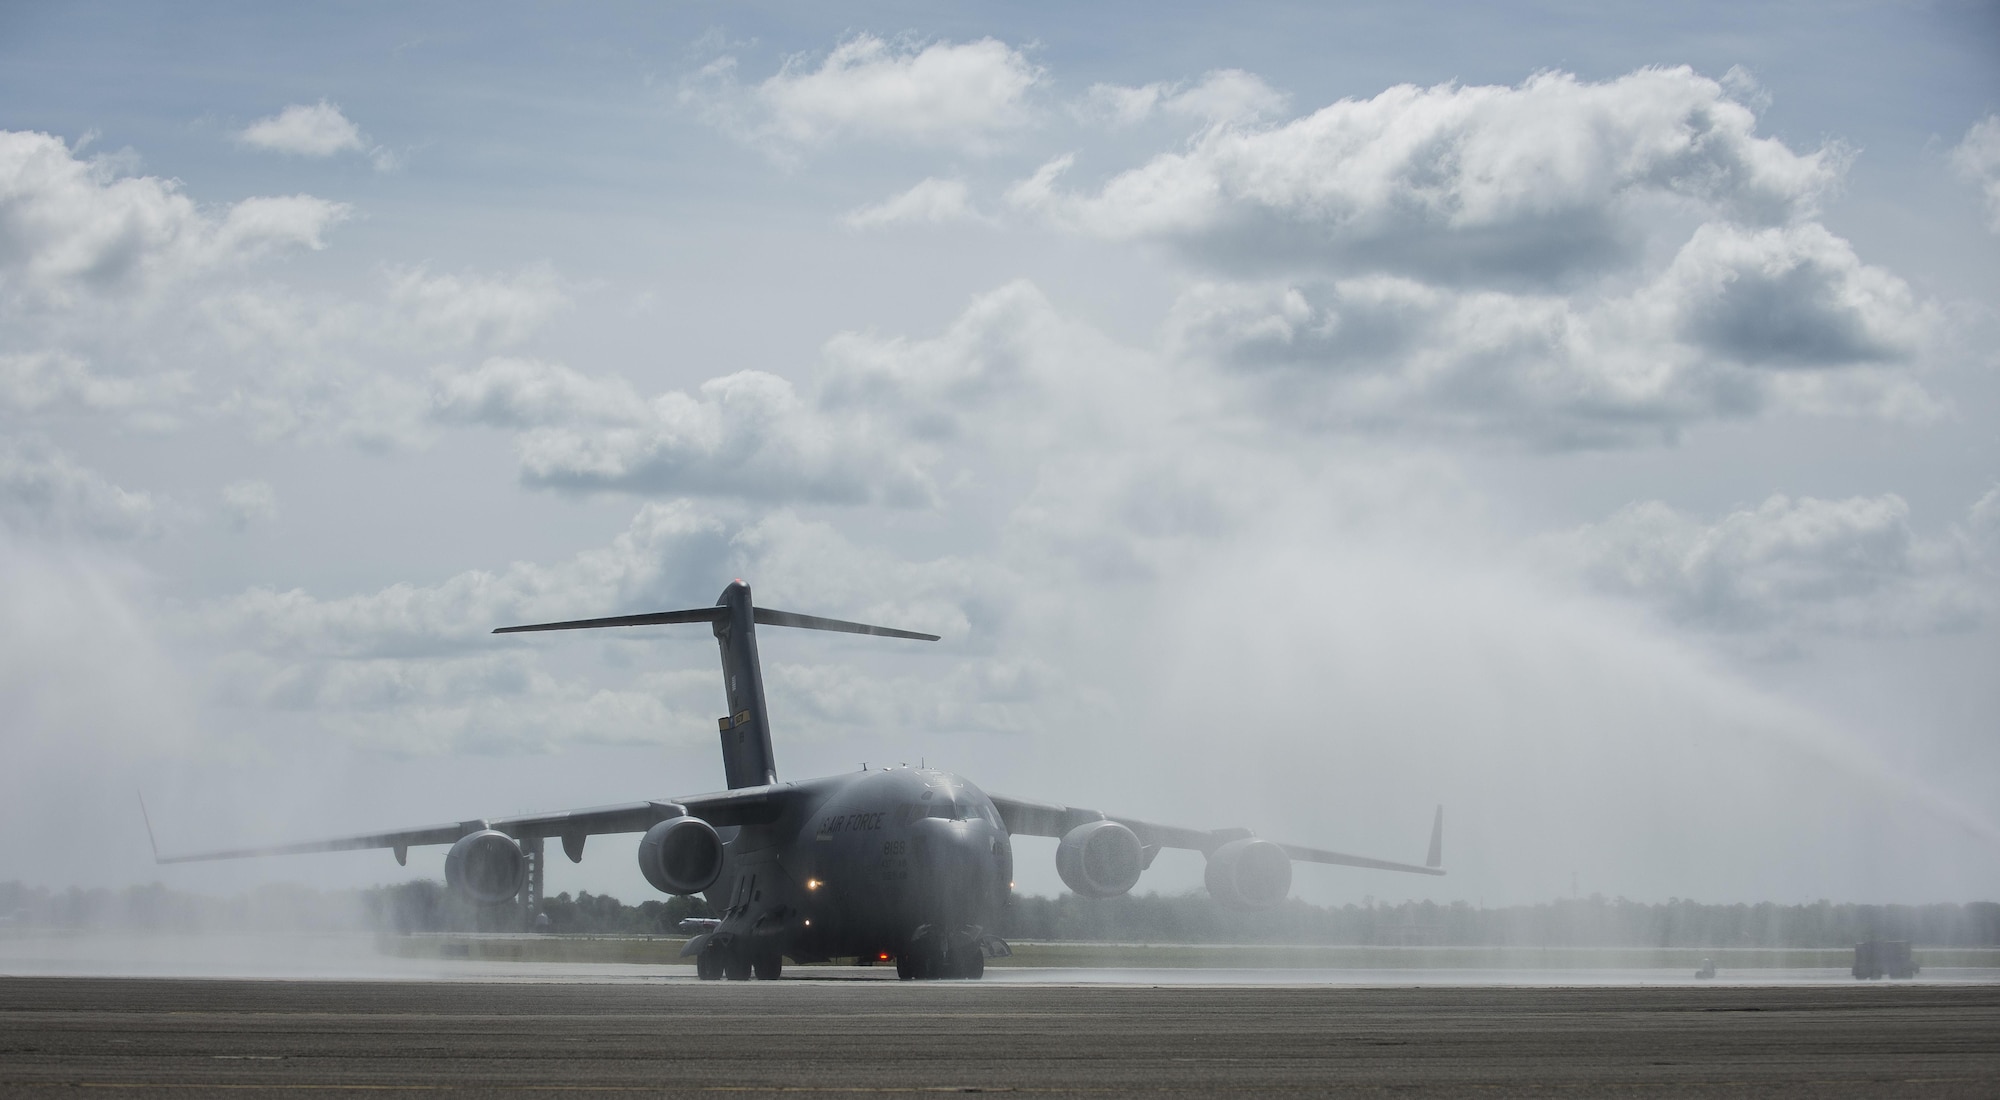 A C-17 Globemaster III assigned to the 437th Airlift Wing and the 315th Airlift Wing is sprayed with water May 5, 2015, at Joint Base Charleston, S.C., during an event celebrating the C-17 surpassing the 3 millionth flying hour. Aircrew members from Charleston flew the plane from Robins Air Force Base, Ga. The first C-17 flight was Sept. 15, 1991, and the Air Force currently has 222 C-17s in the fleet. (U.S. Air Force photo/Senior Airman Jared Trimarchi) 